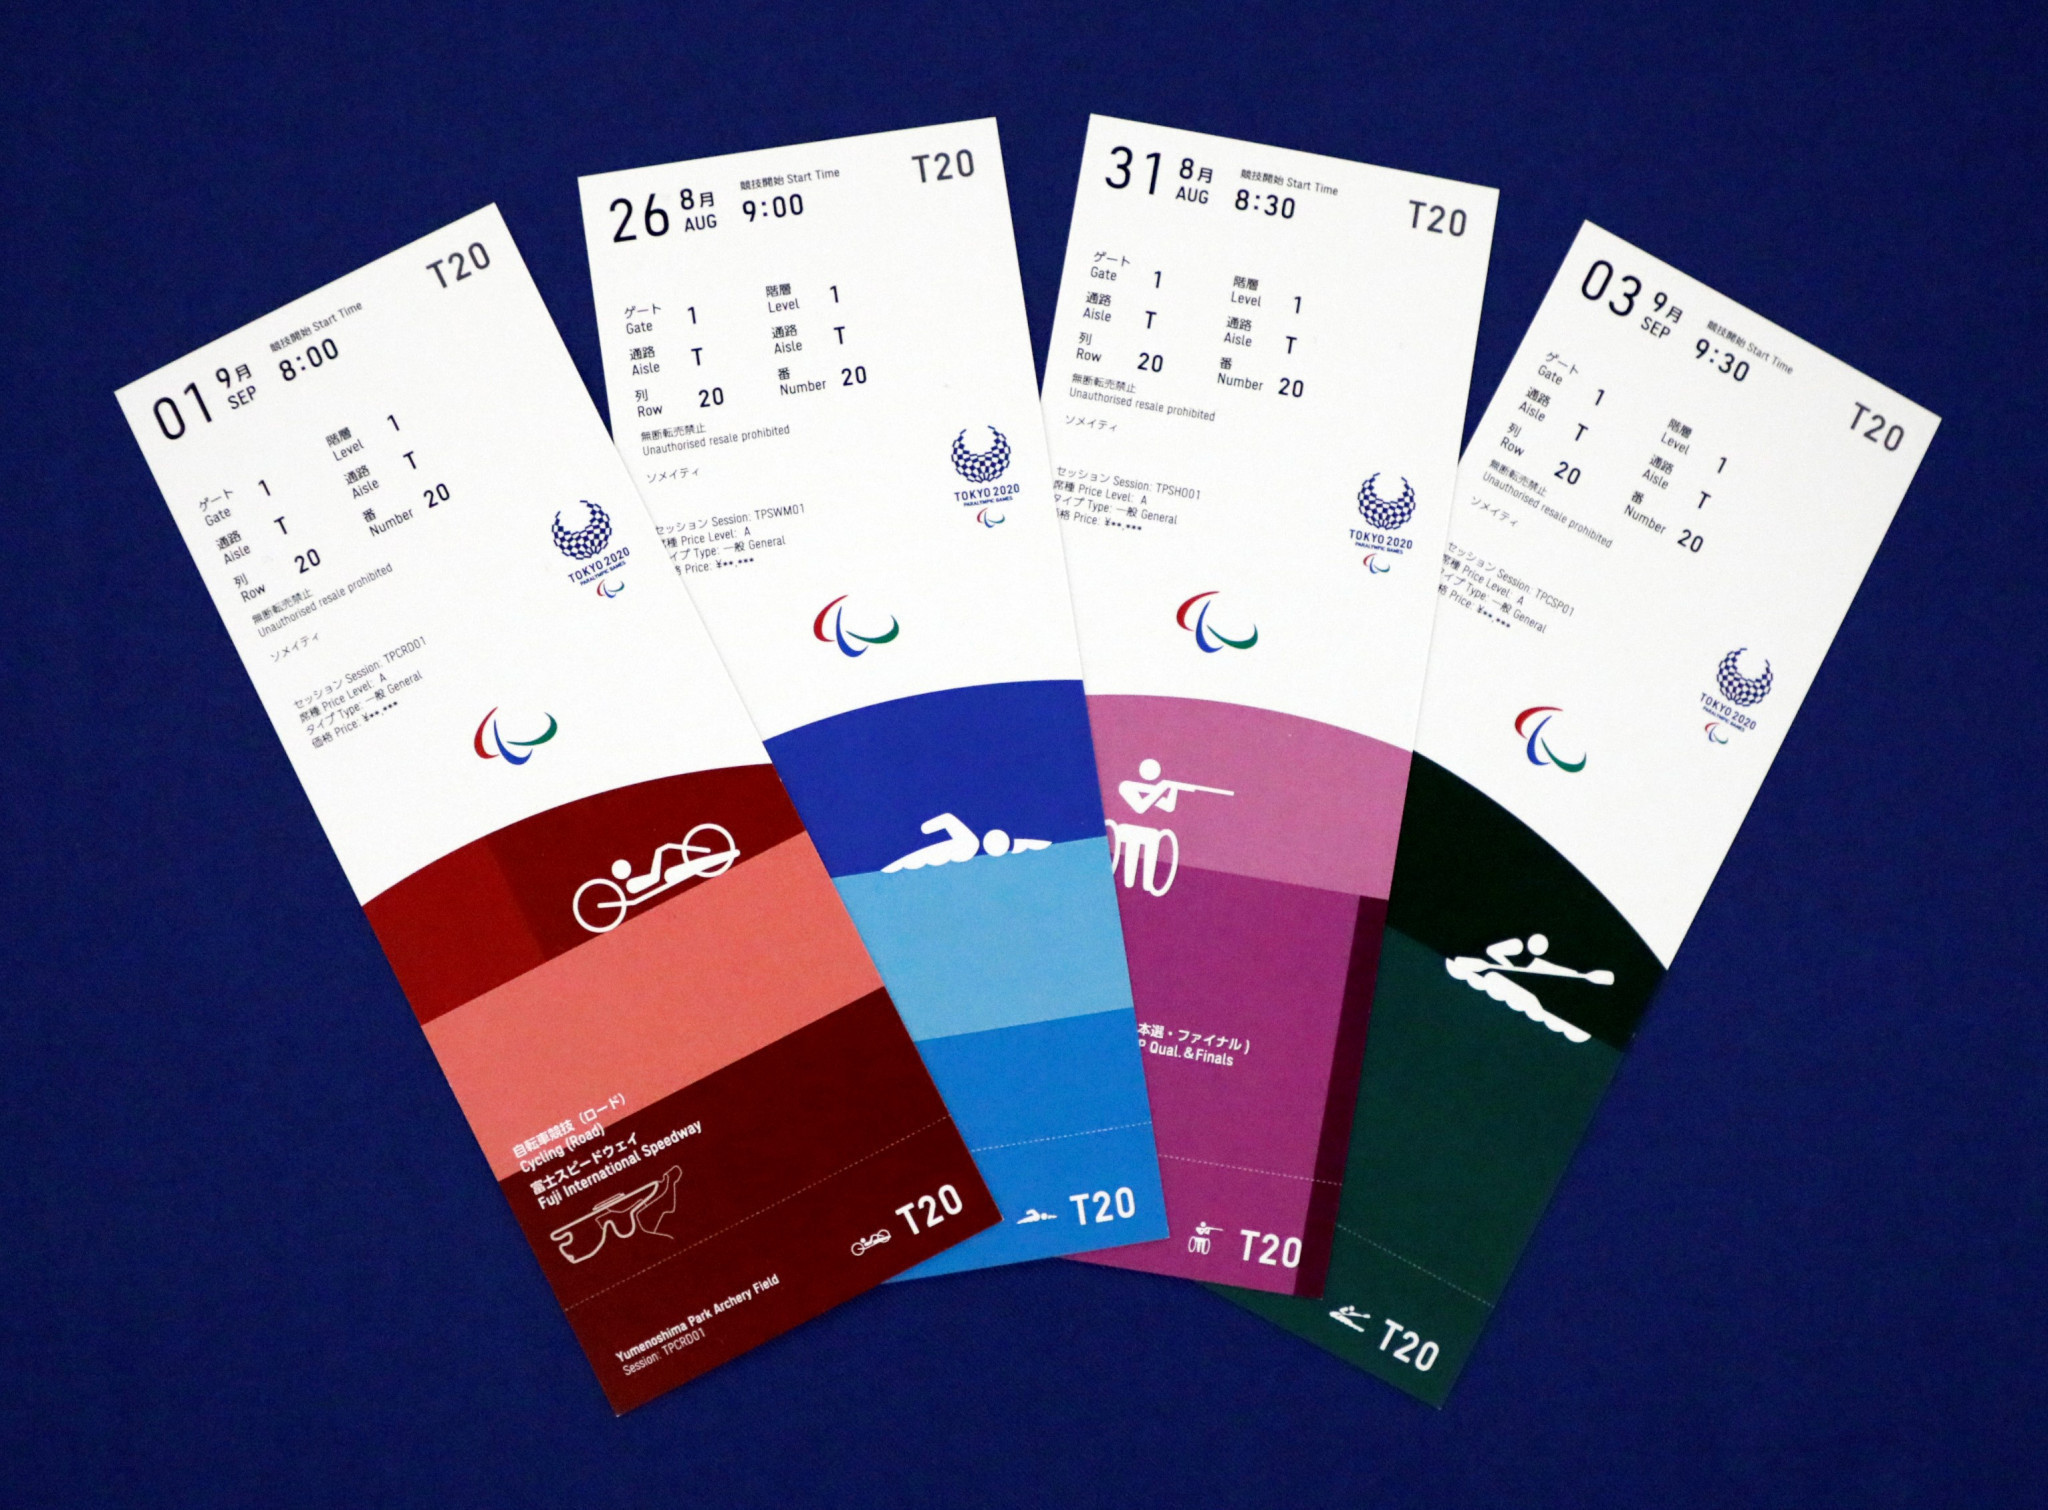 The second Tokyo 2020 Paralympics ticket lottery in Japan has closed ©Tokyo 2020